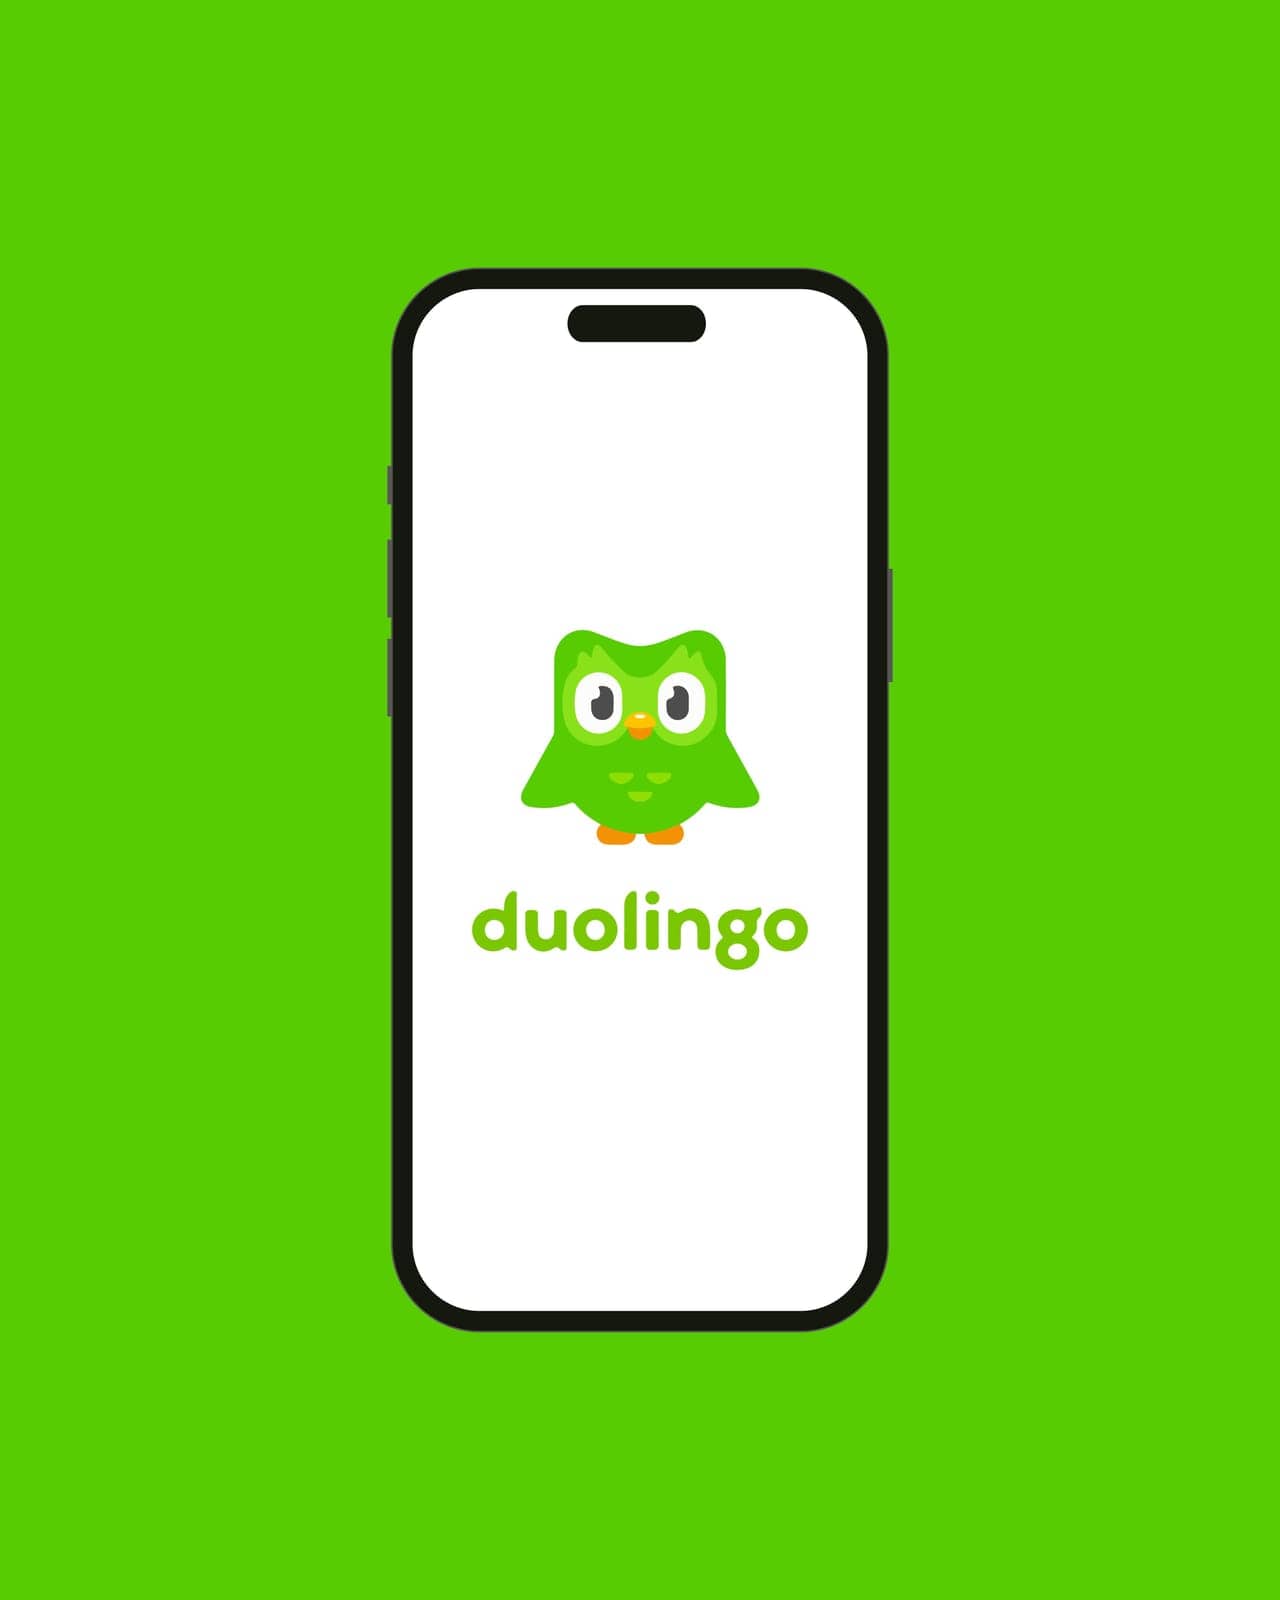 Kyiv, Ukraine - 03 June 2022: Owl Duolingo logo on Iphone 14 screen - vector illustration. Duolingo an American educational technology company. App on the smartphone for learning foreign languages